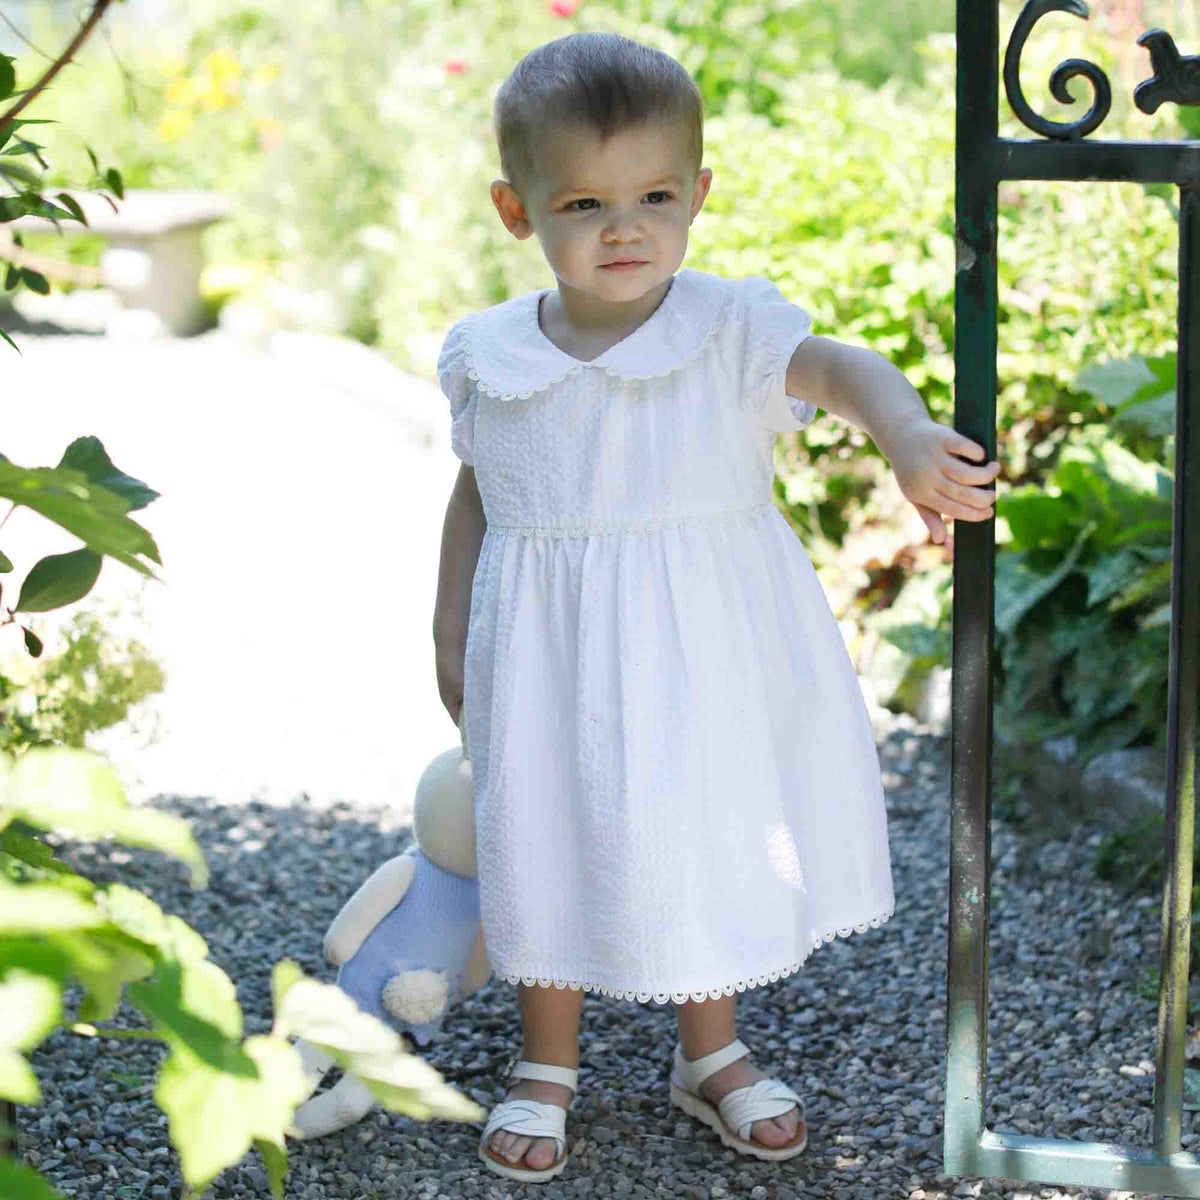 Classic and Preppy Hazel Dress, White Seersucker-Dresses, Jumpsuits and Rompers-CPC - Classic Prep Childrenswear